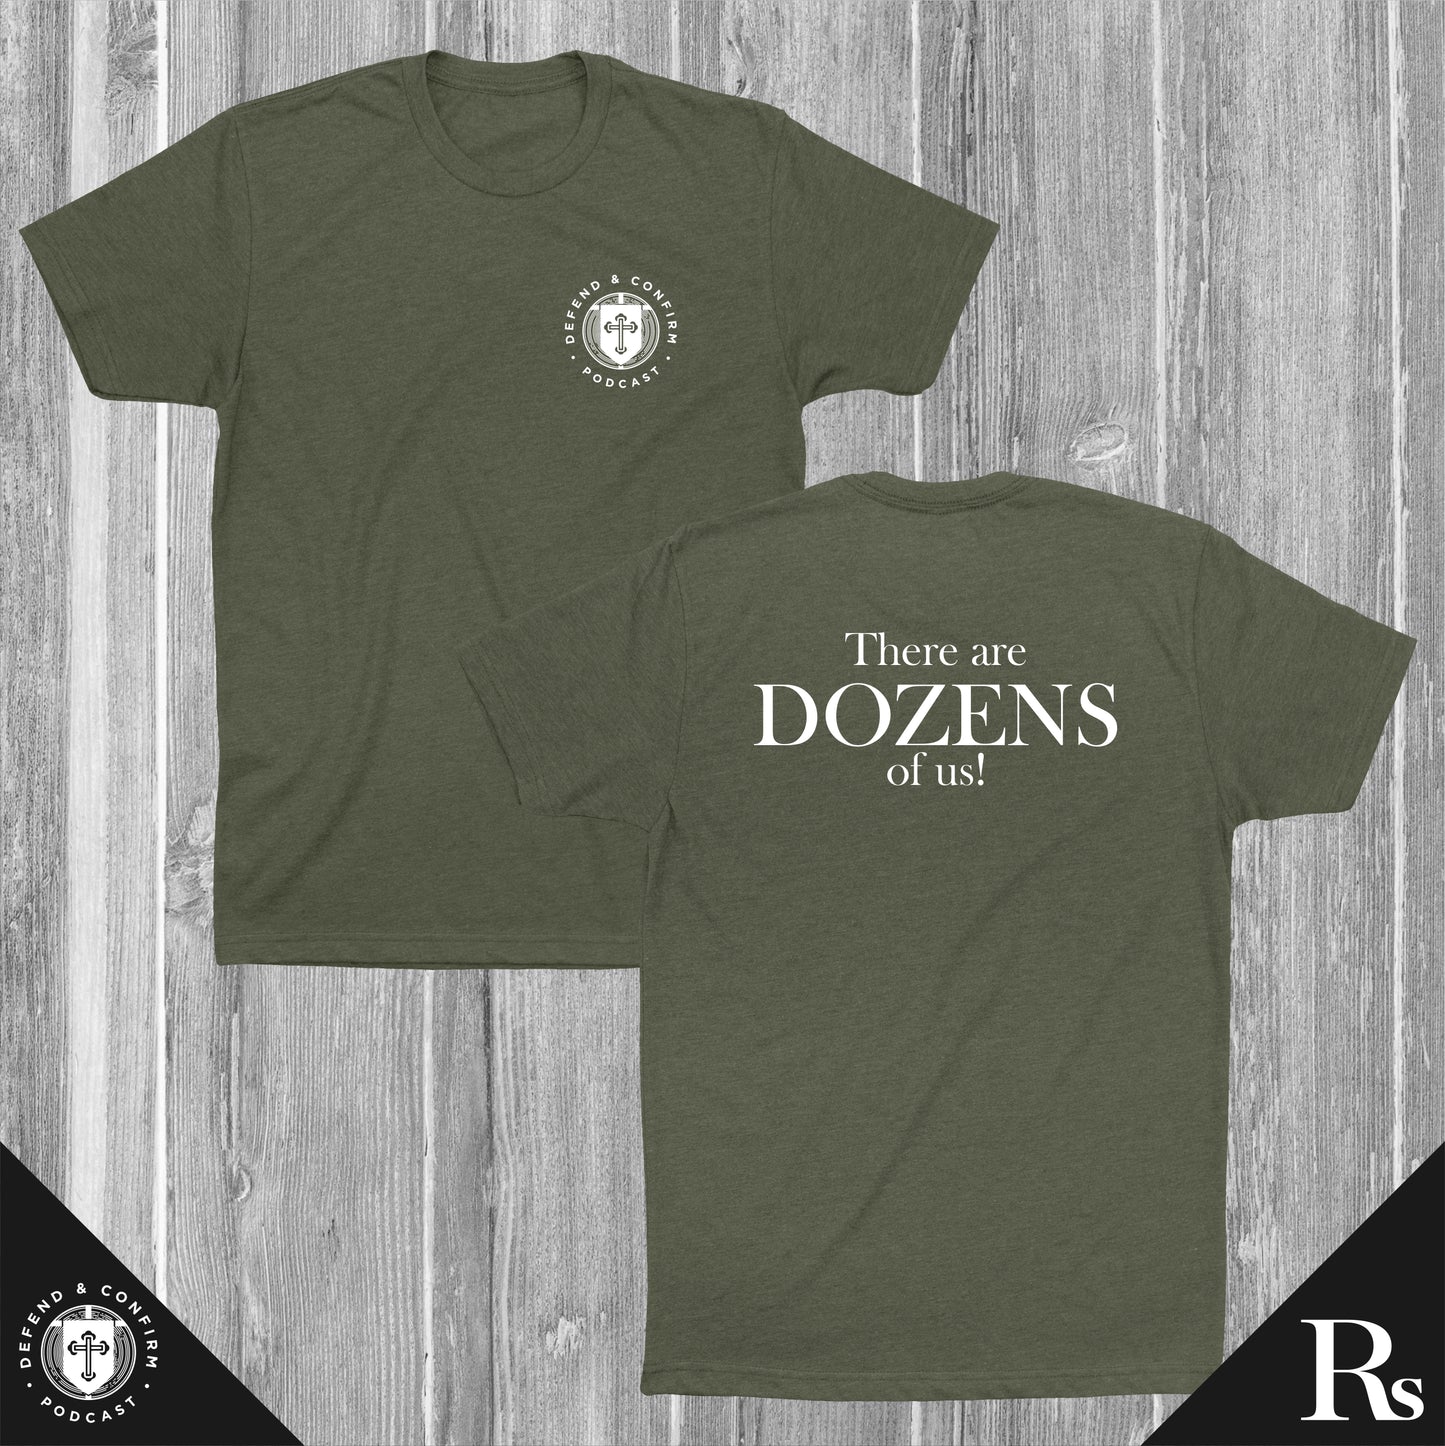 Dozens | Official Podcast T-shirts